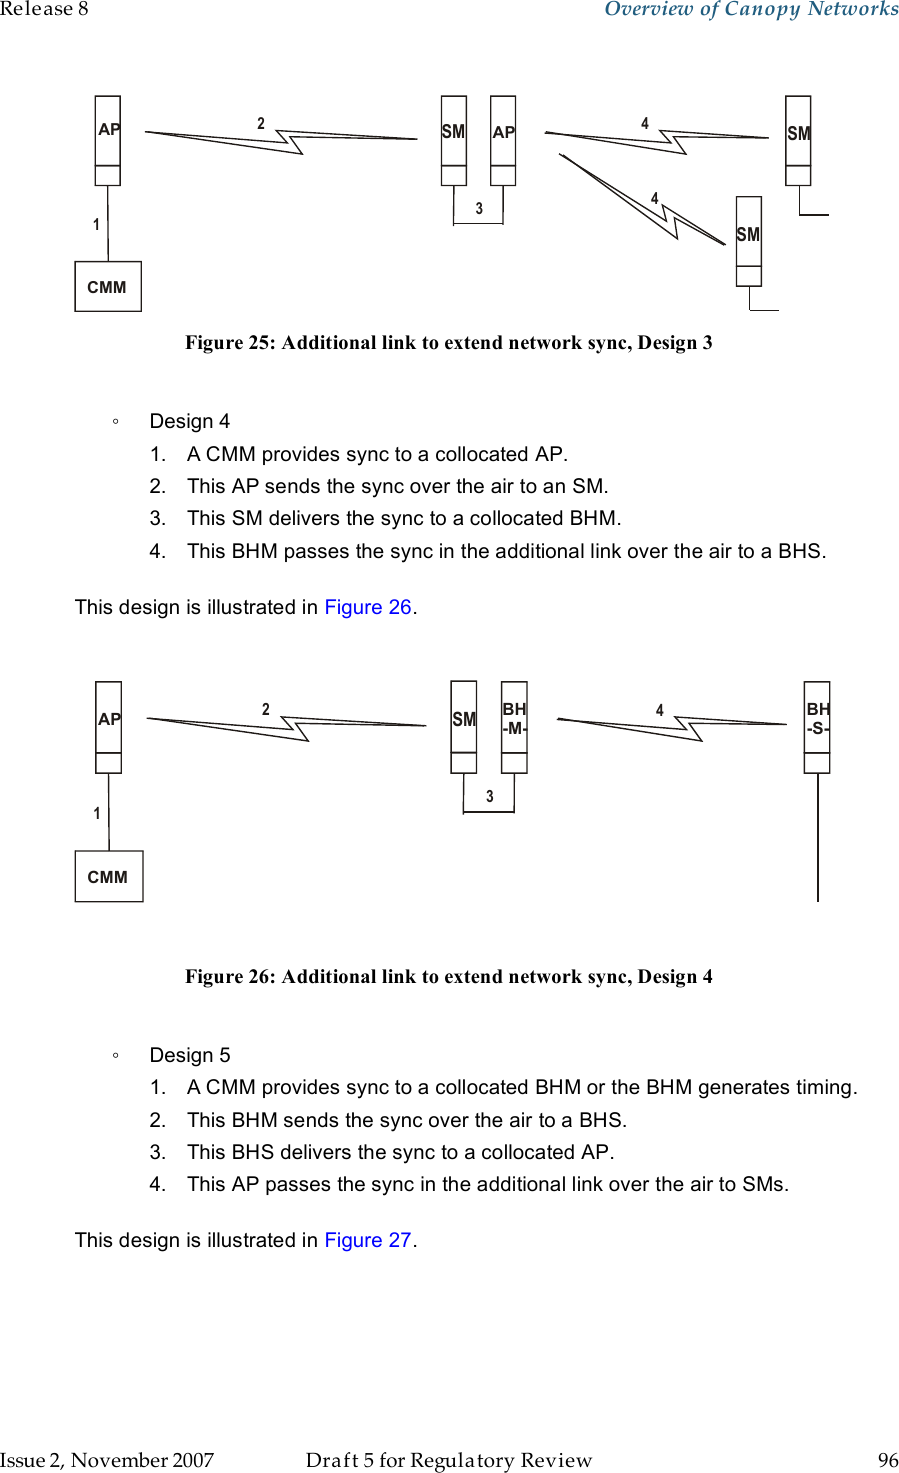 Release 8    Overview of Canopy Networks                  March 200                  Through Software Release 6.   Issue 2, November 2007  Draft 5 for Regulatory Review  96     CMMAP APSM SMSM21344 Figure 25: Additional link to extend network sync, Design 3  ◦  Design 4 1.  A CMM provides sync to a collocated AP. 2.  This AP sends the sync over the air to an SM. 3.  This SM delivers the sync to a collocated BHM. 4.  This BHM passes the sync in the additional link over the air to a BHS.  This design is illustrated in Figure 26.  CMMBH-M-AP BH-S-SM2134  Figure 26: Additional link to extend network sync, Design 4  ◦  Design 5 1.  A CMM provides sync to a collocated BHM or the BHM generates timing. 2.  This BHM sends the sync over the air to a BHS. 3.  This BHS delivers the sync to a collocated AP. 4.  This AP passes the sync in the additional link over the air to SMs.  This design is illustrated in Figure 27.  